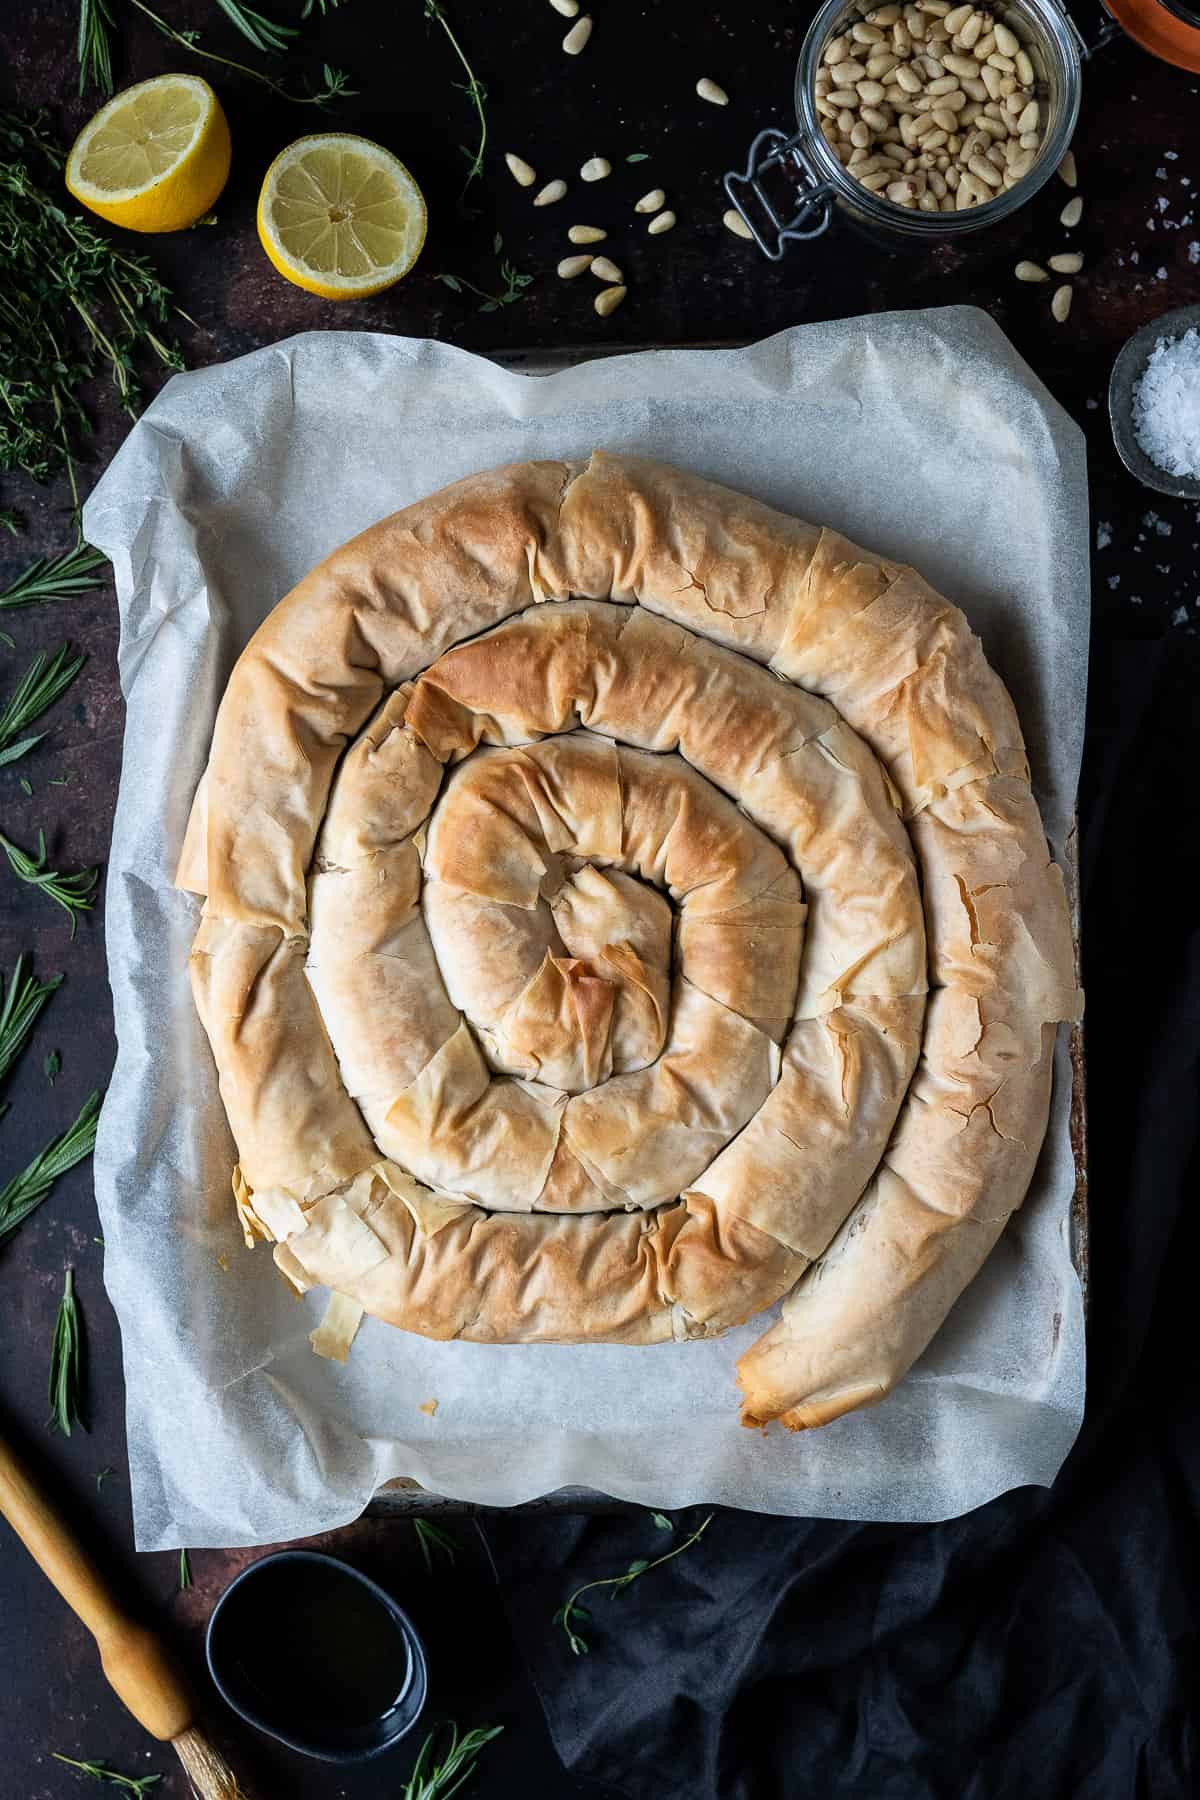 Vegan butternut squash and feta spiral pie on a baking parchment lined baking sheet on a dark background surrounded by fresh herbs, a jar of pine nuts, a halved lemon, pastry brush and bowl of olive oil.